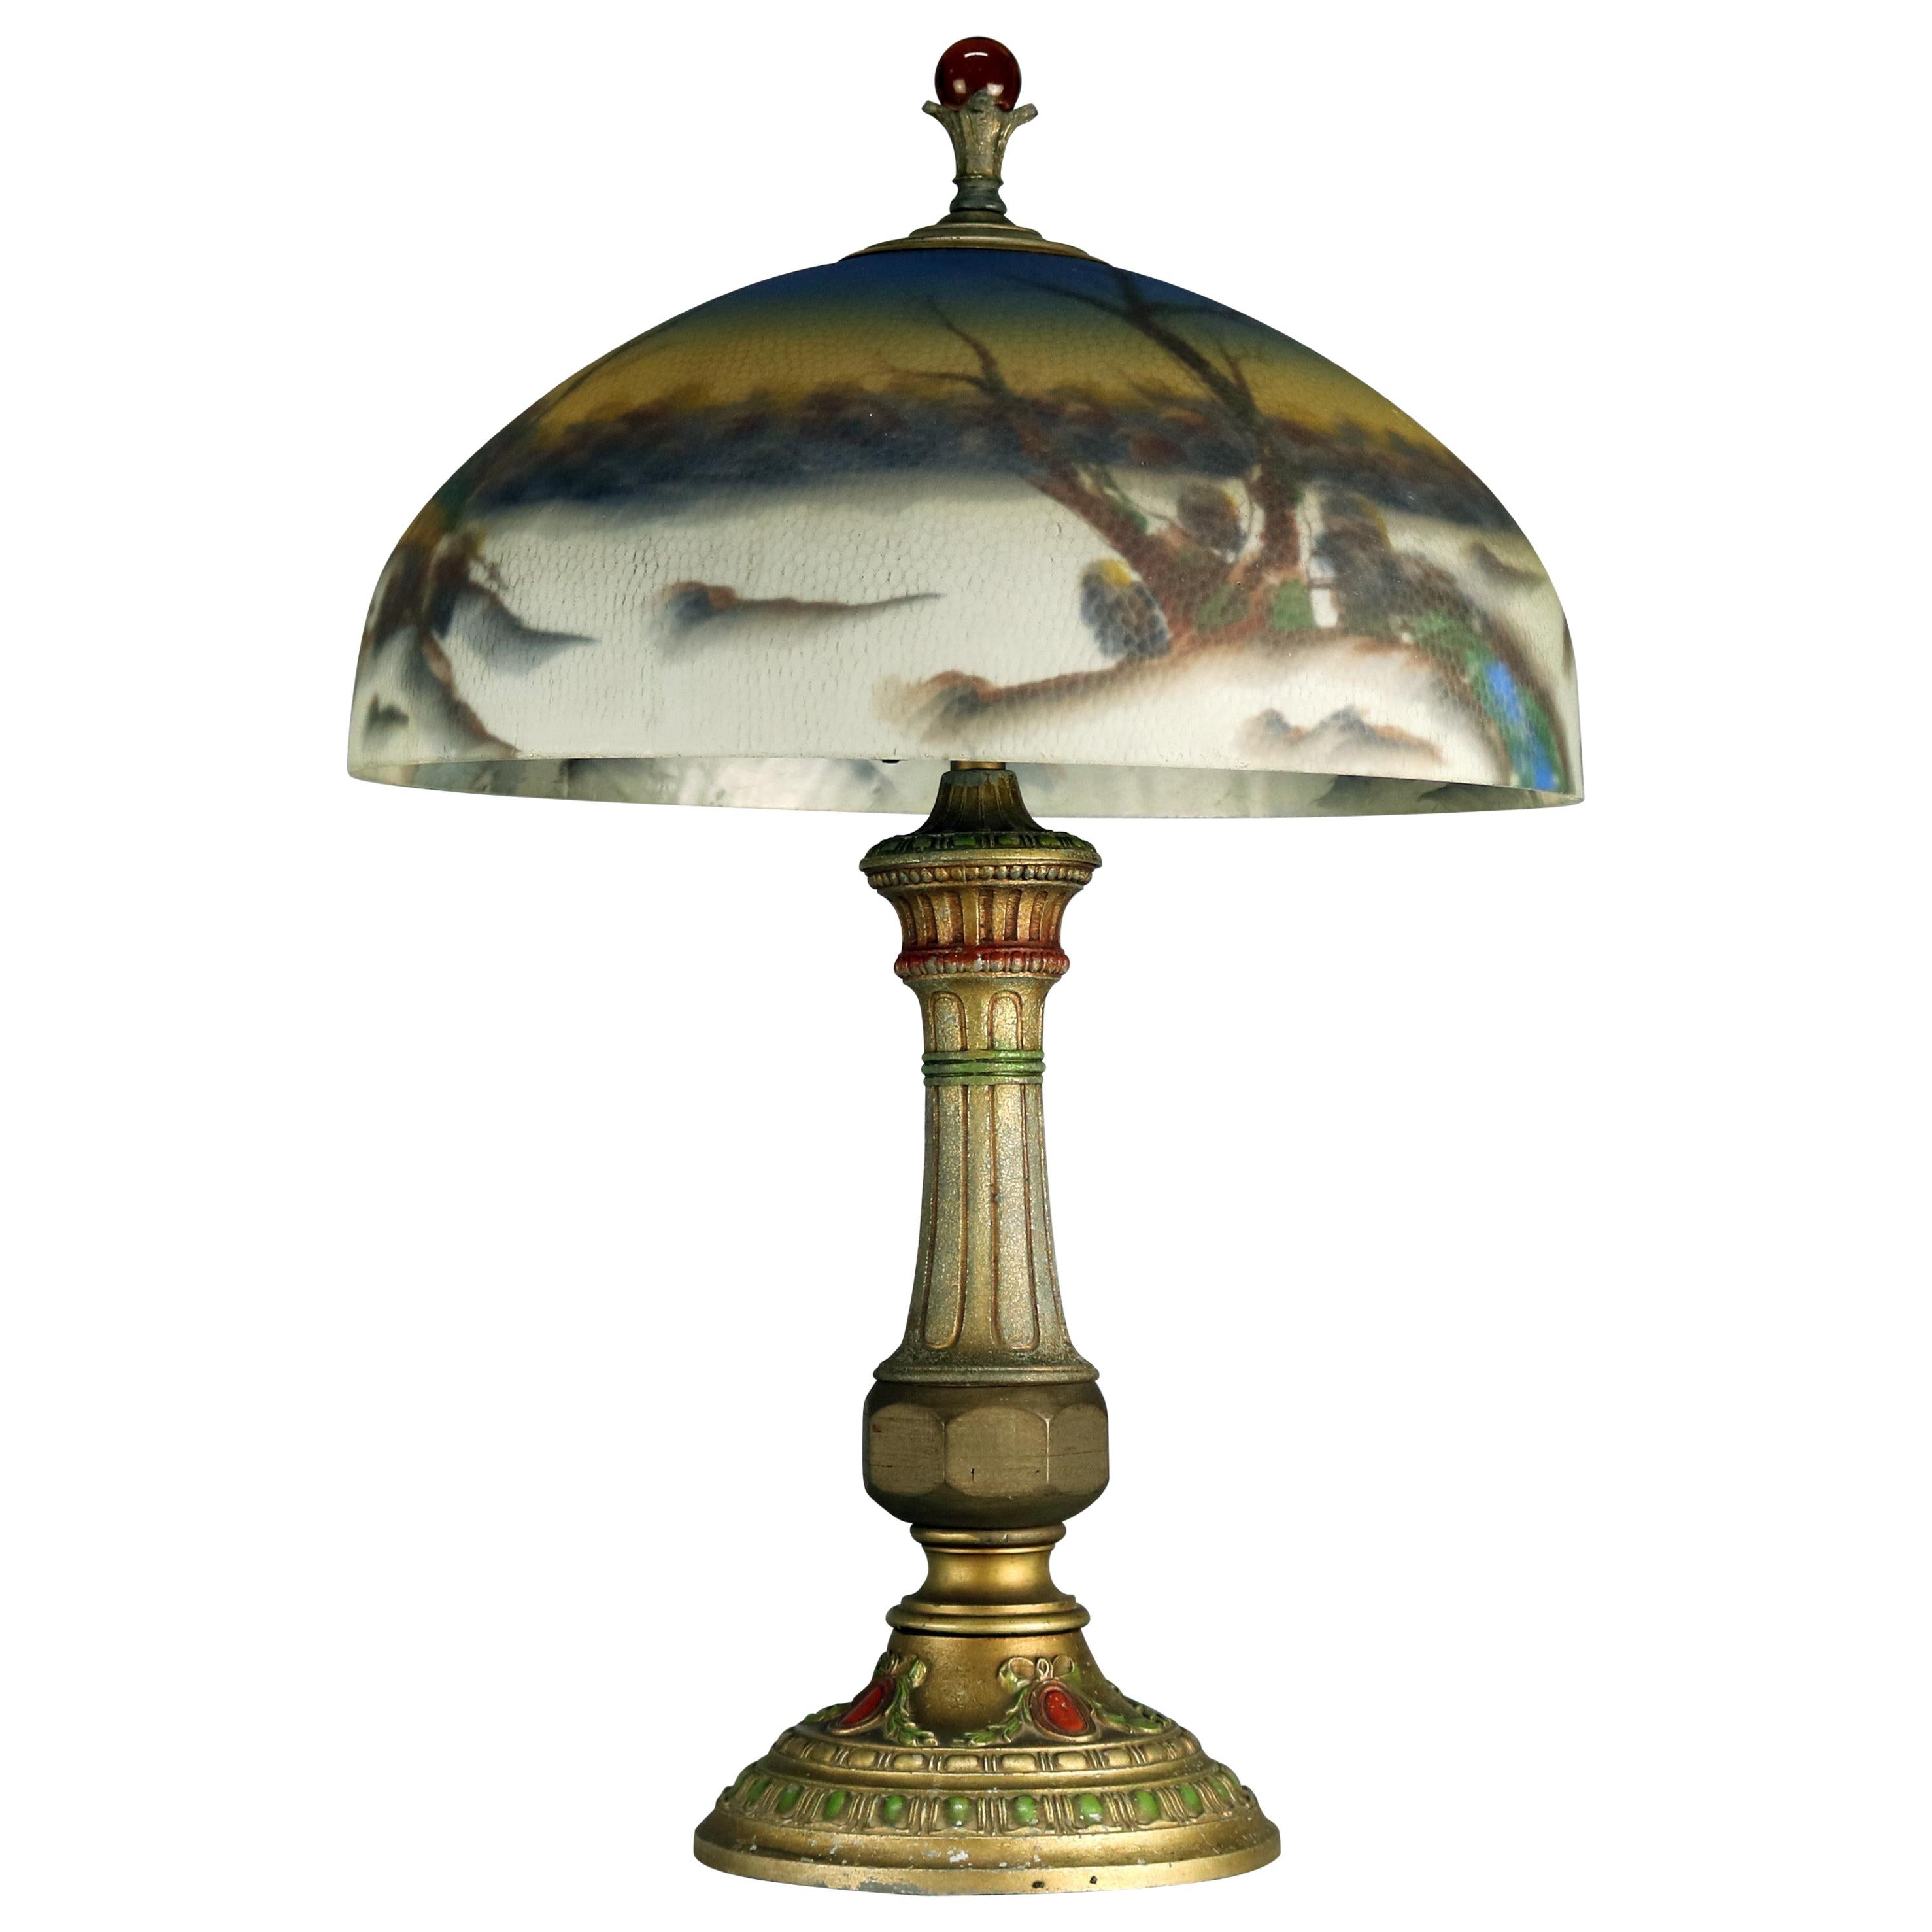 Antique Arts & Crafts Pittsburgh School Reverse Painted Table Lamp, circa 1920